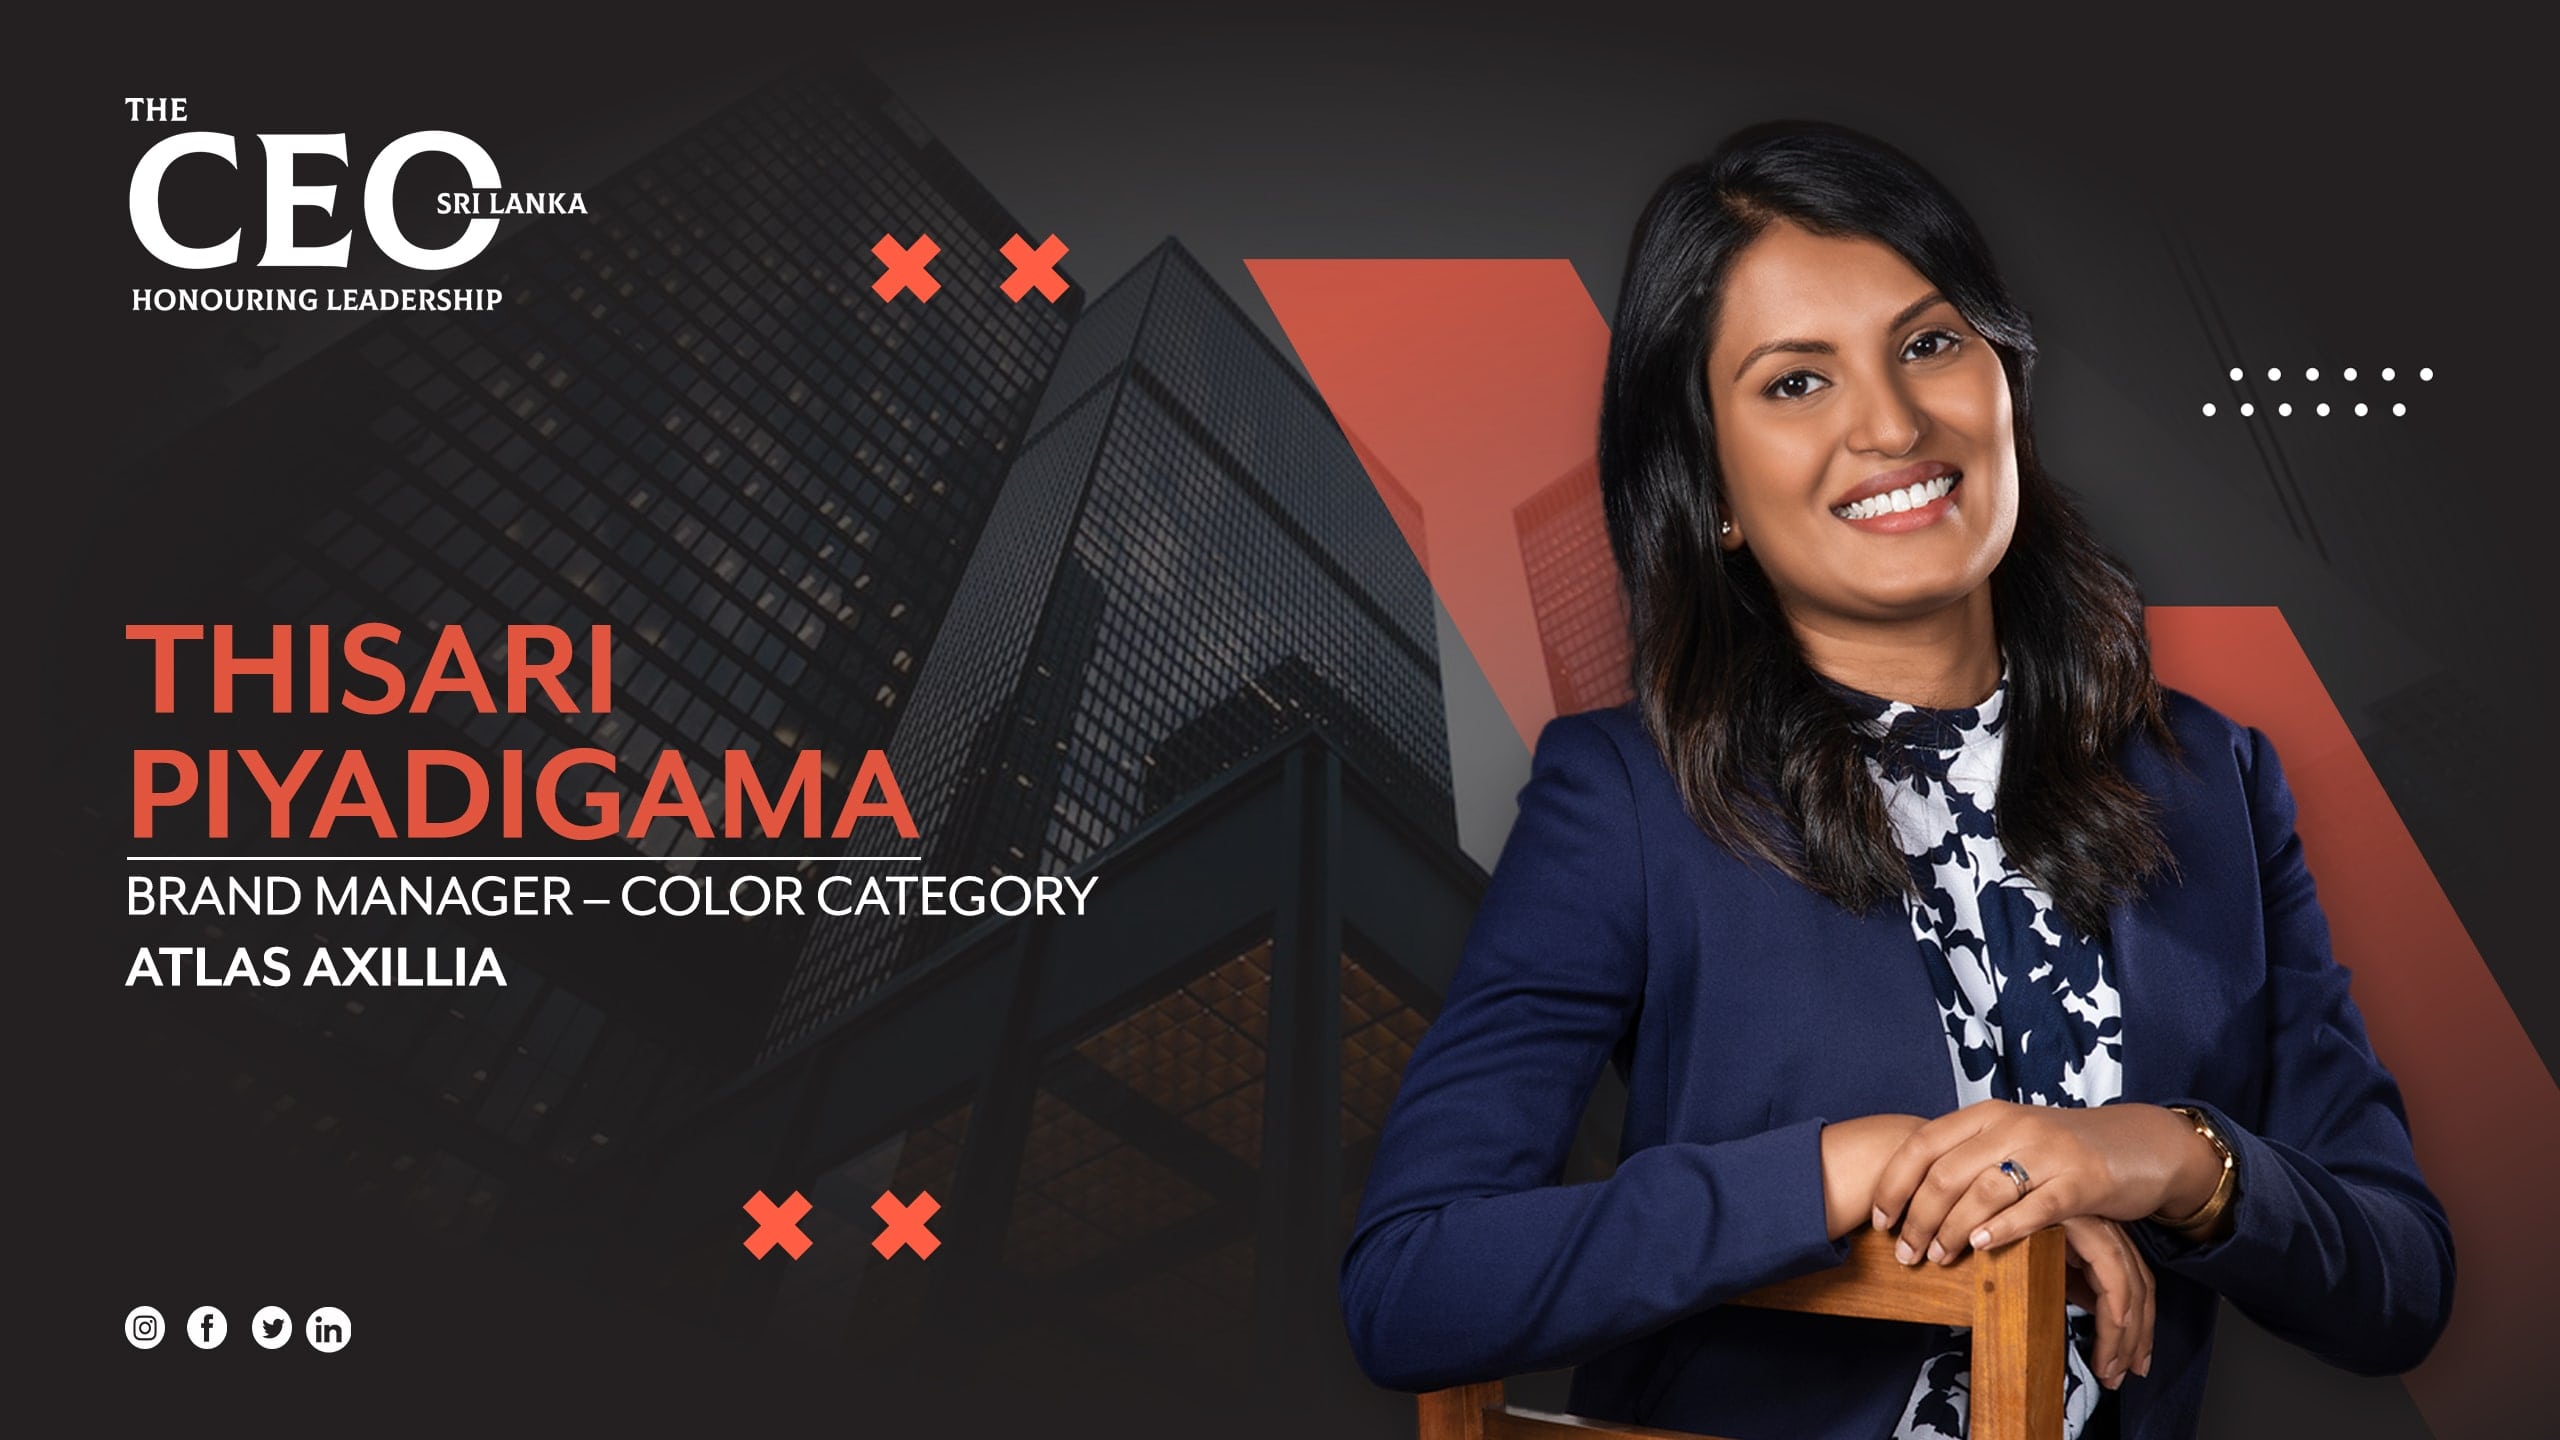 THE YOUNG TEAM OF LEADERS AT ATLAS AXILLIA TRANSFORMING THE LEARNING LANDSCAPE OF SRI LANKA – BRAND MANAGER OF THE COLOR CATEGORY OF ATLAS AXILLIA, THISARI PIYADIGAMA